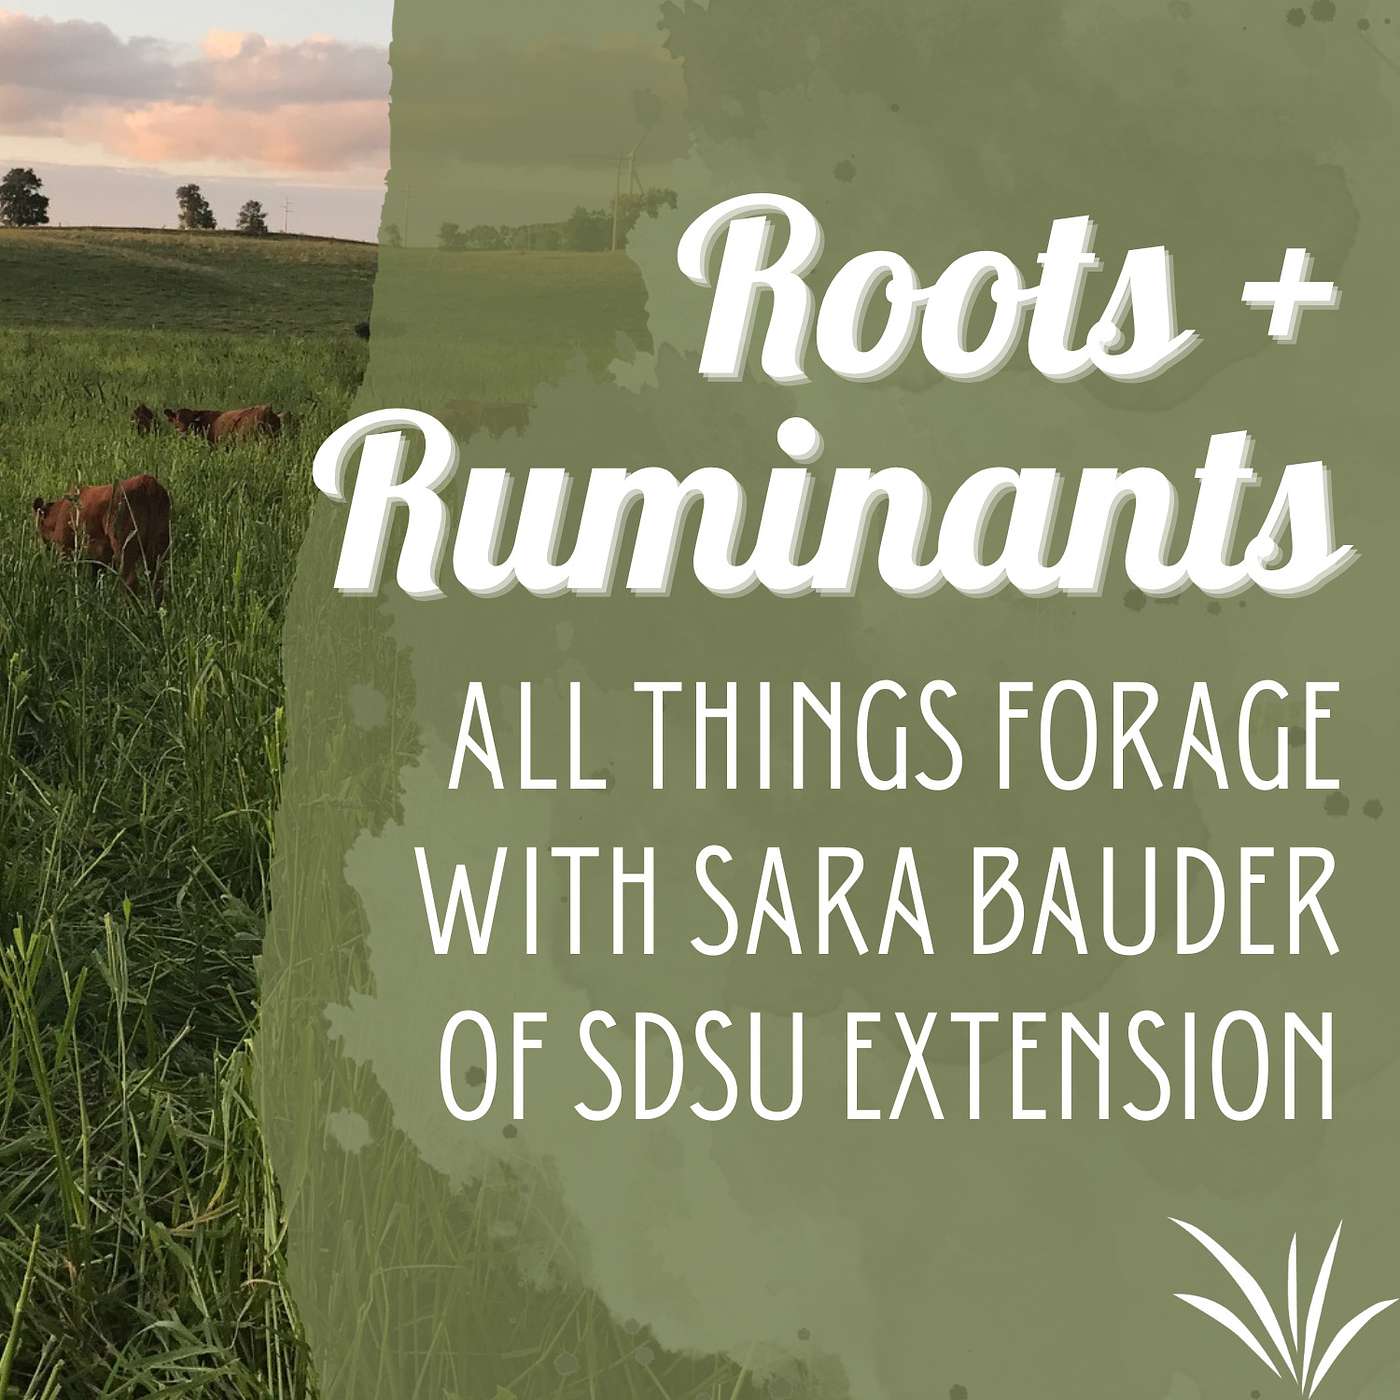 All things forage with Sara Bauder of SDSU Extension cover art